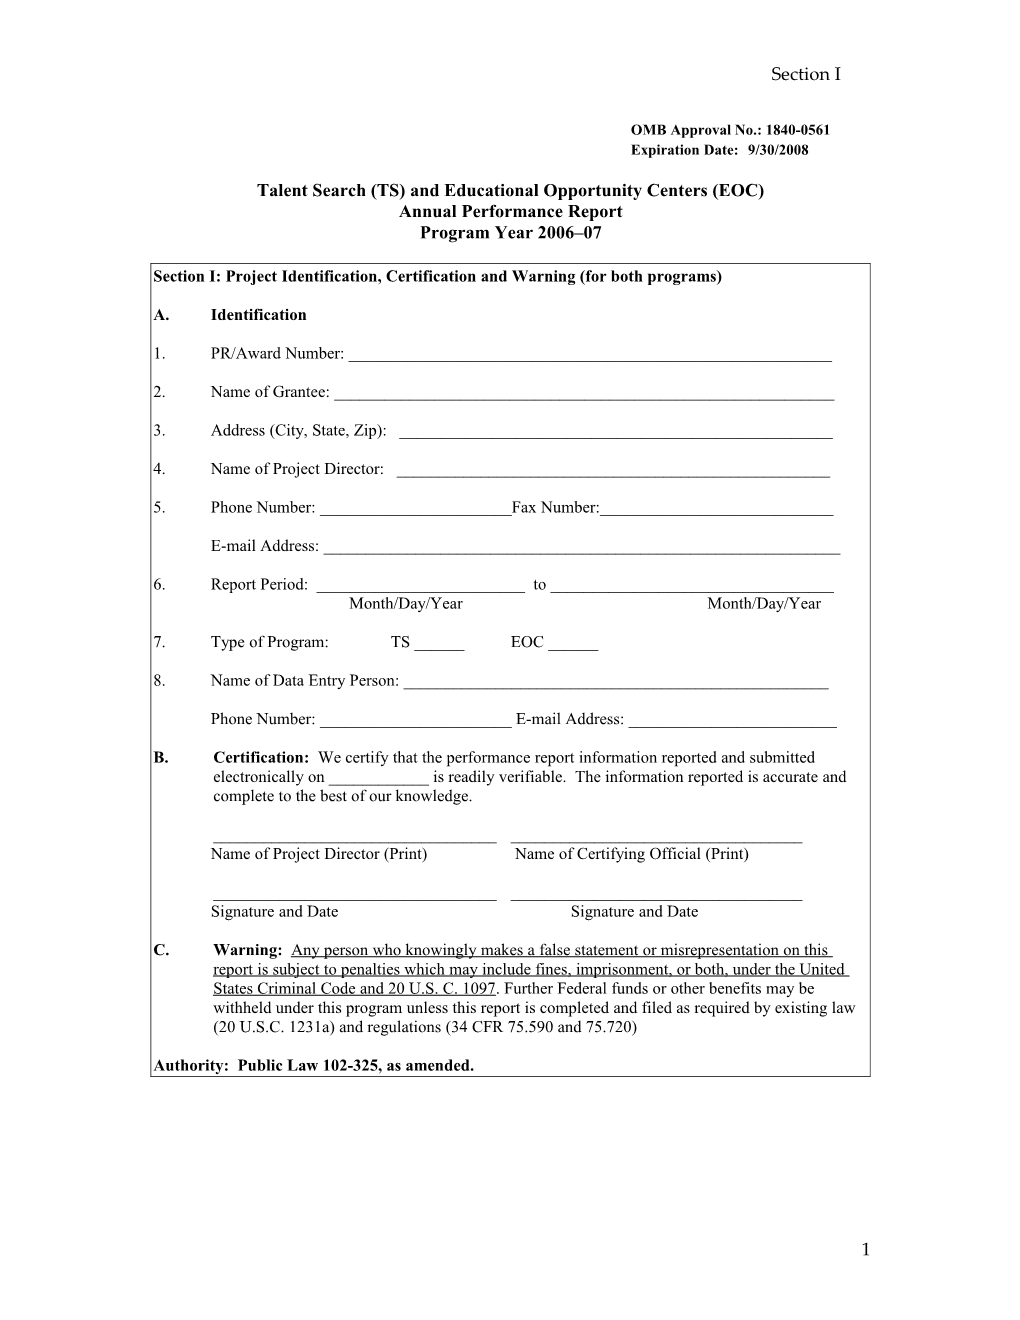 Annual Performance Report Form 2006-07 for the Talent Search Program and EOC Program (MS Word)